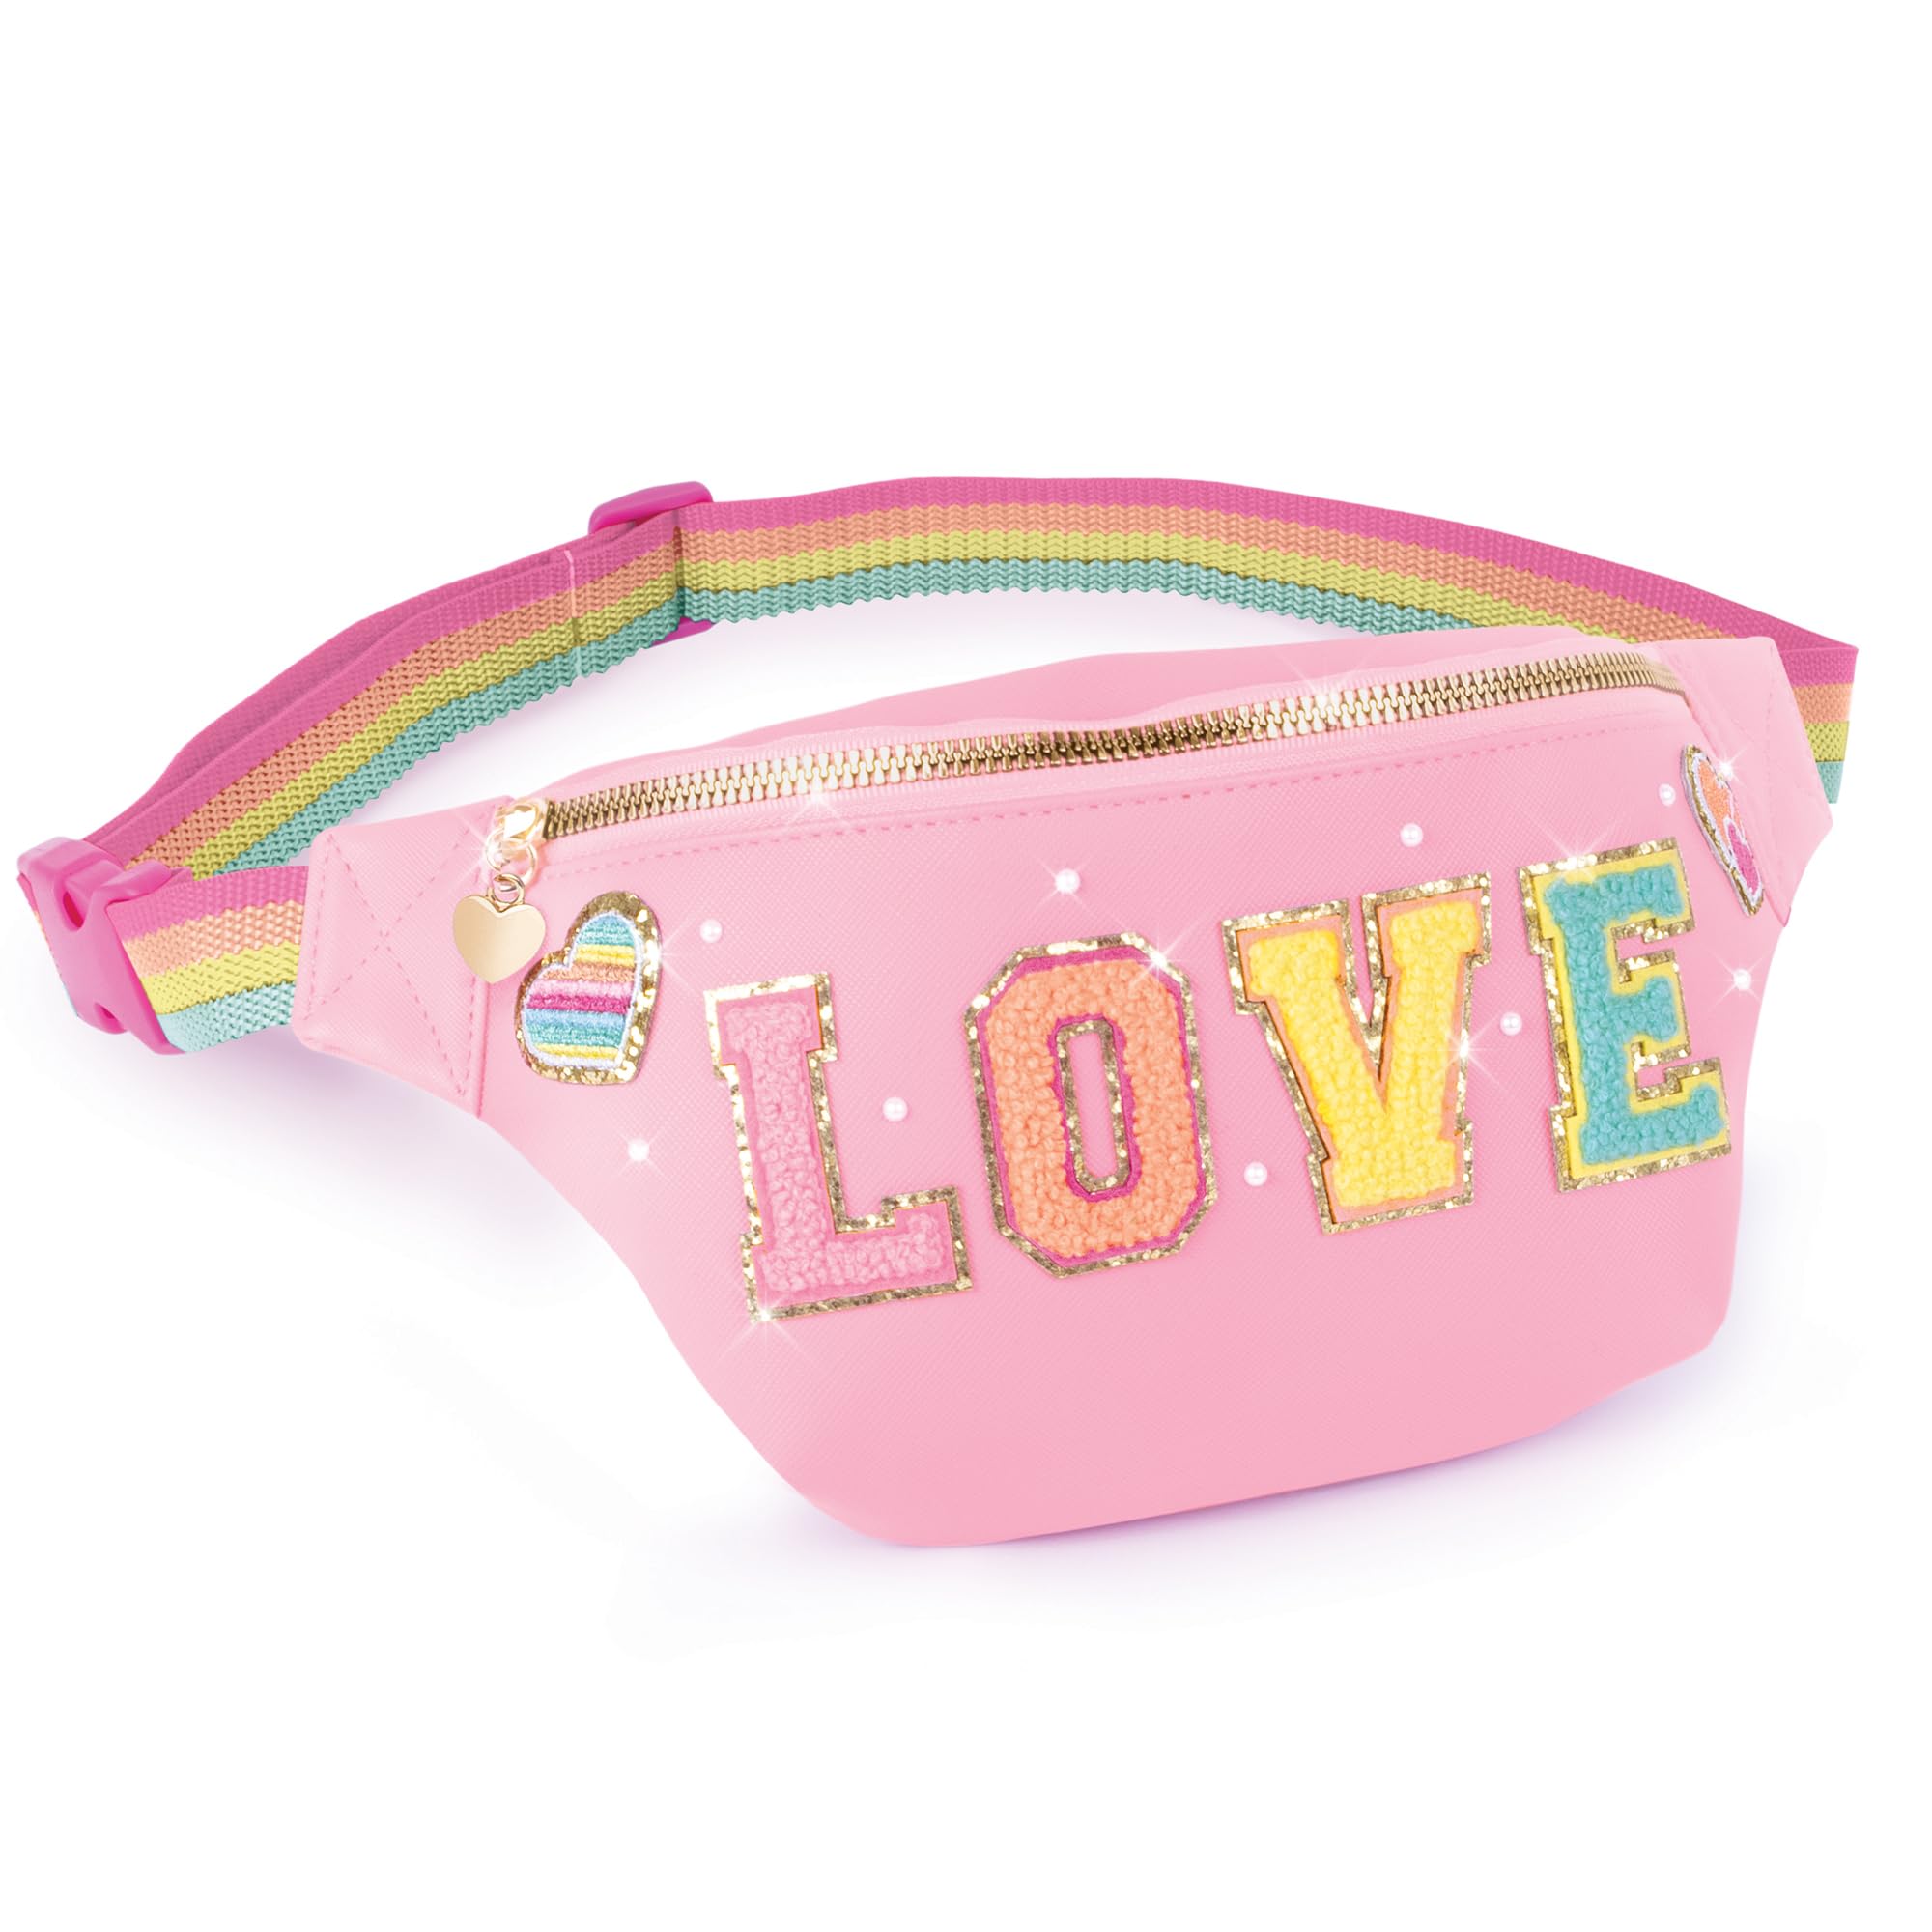 Make It Real: Fashion Bum Bag with Patches - 9 pcs, Pink Zipper Bag with Rainbow Band, DIY Customize, Love Patches, Tweens, Girls & Kids Ages 8+